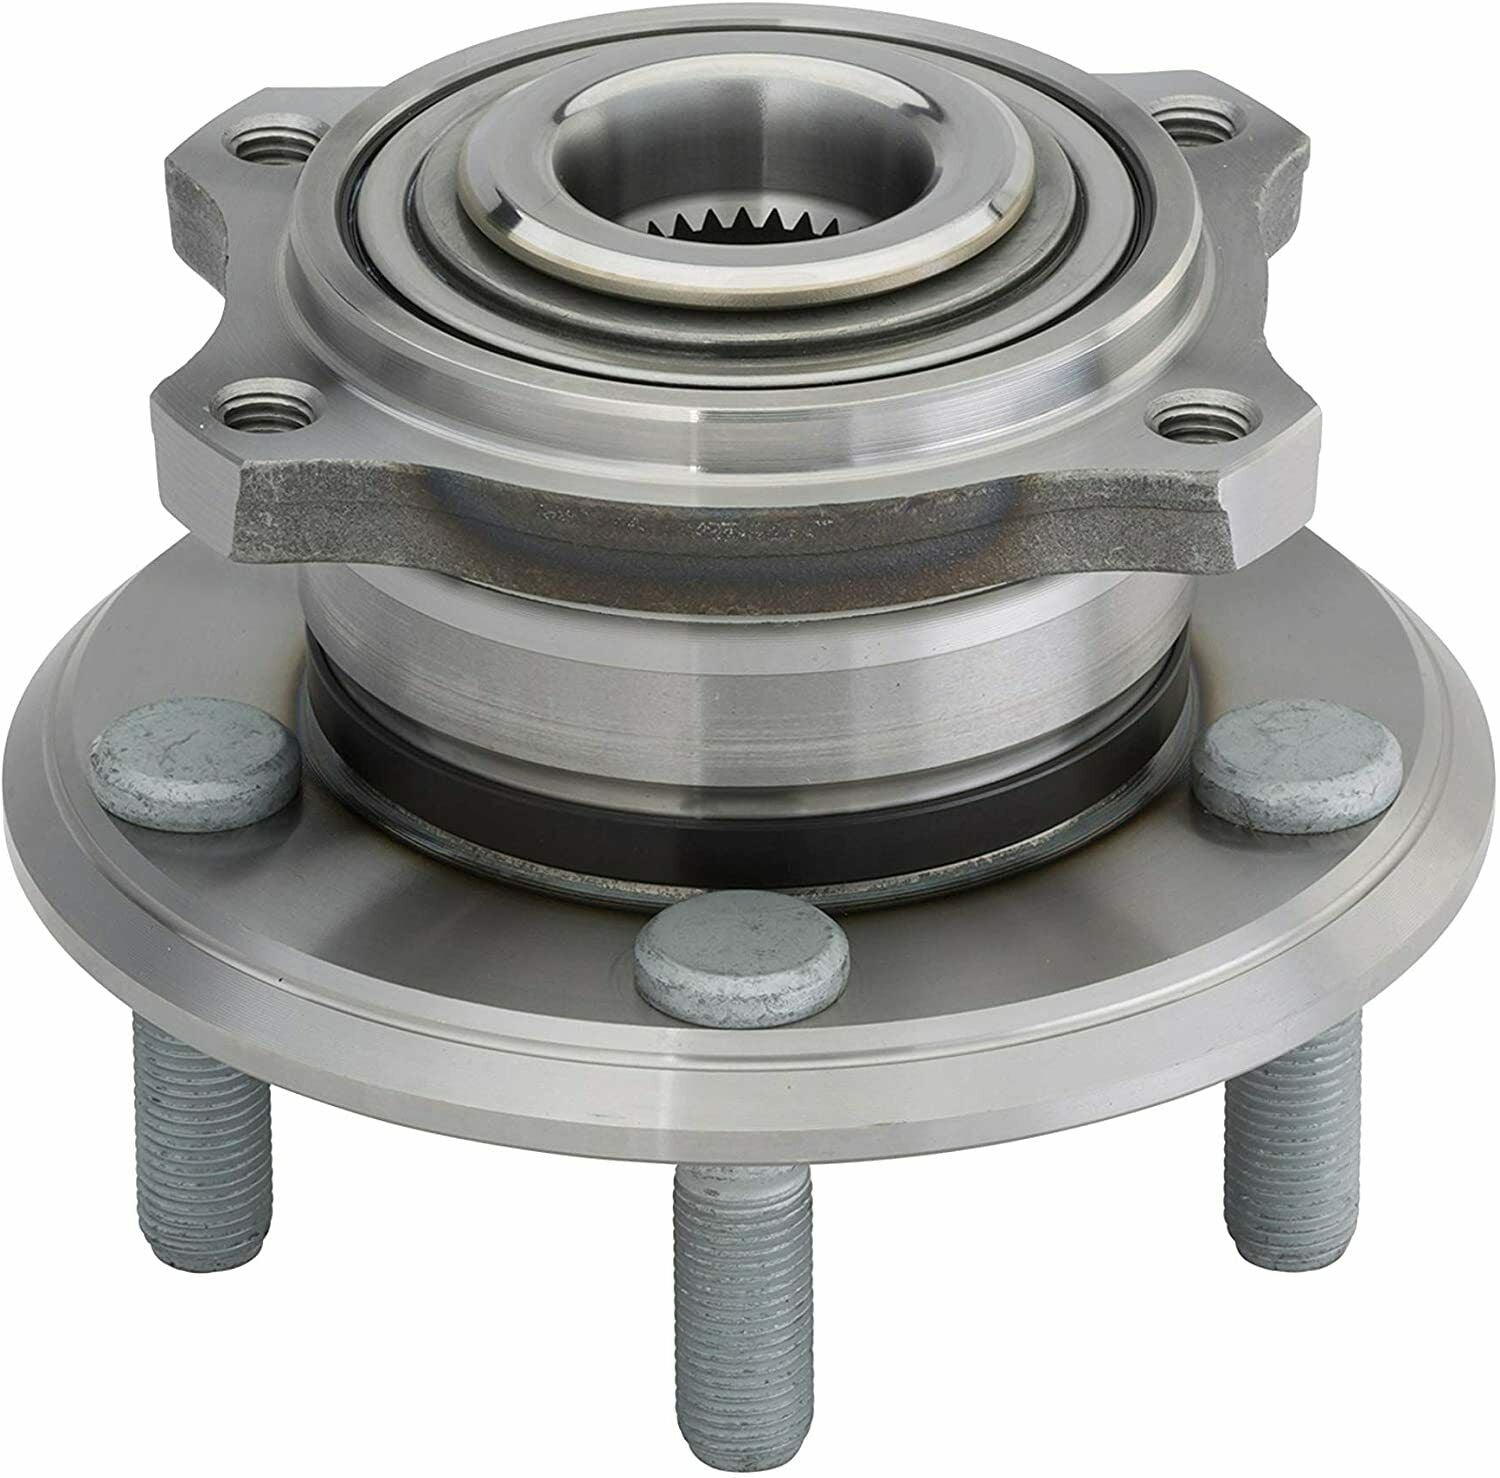 JADODE Rear Wheel Hub Bearing Assembly for Dodge 2009-2014 Charger 2008-2014 Challenger